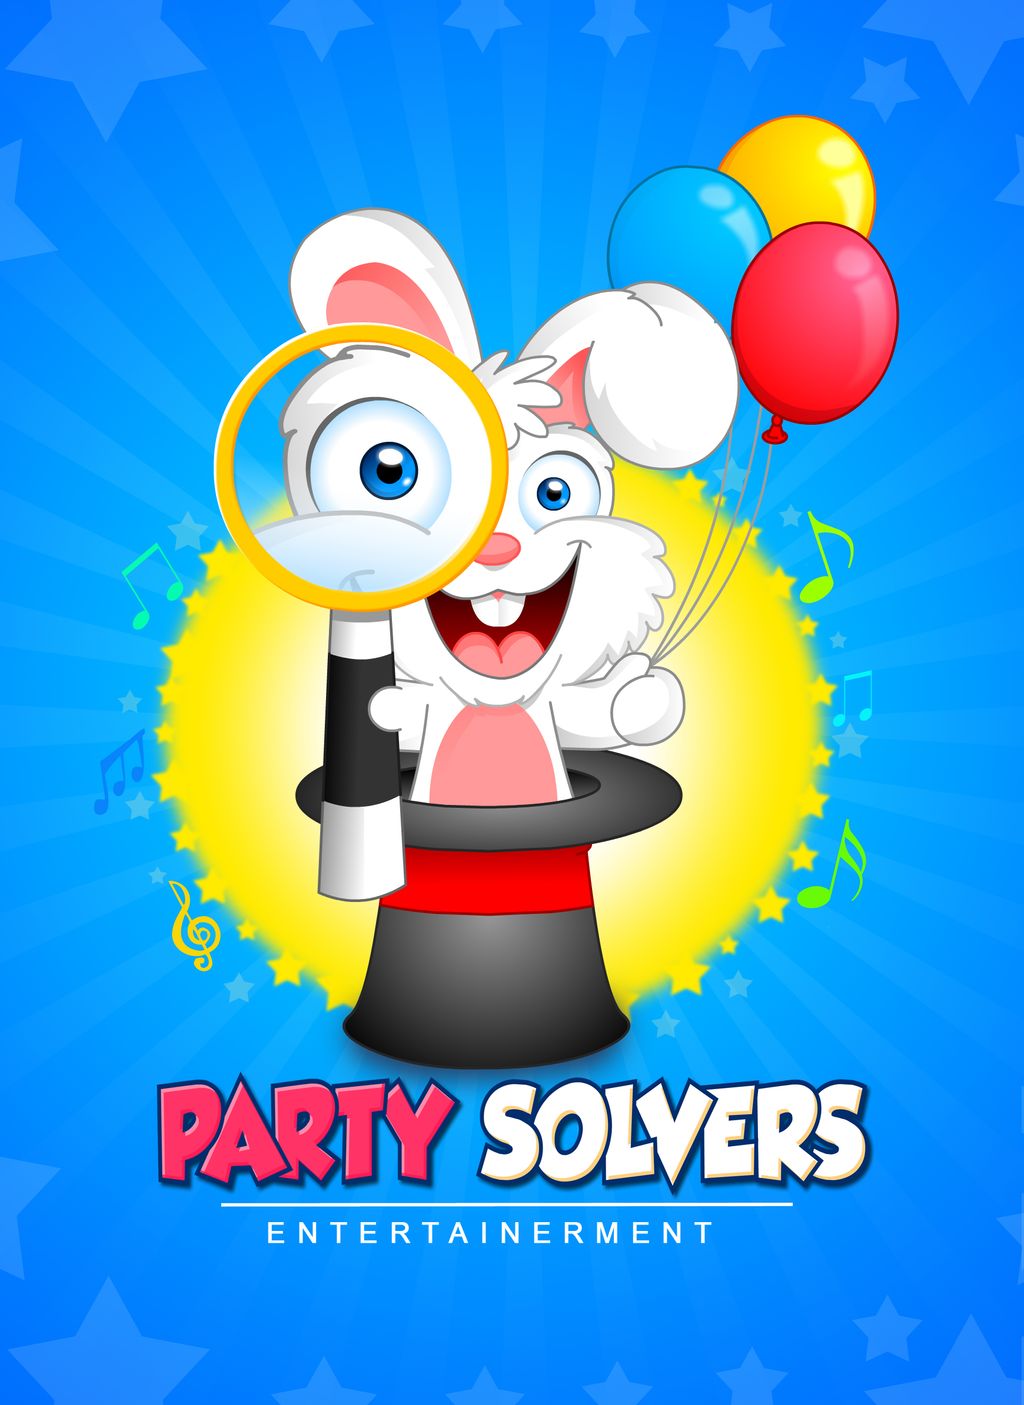 Party Solvers Entertainment